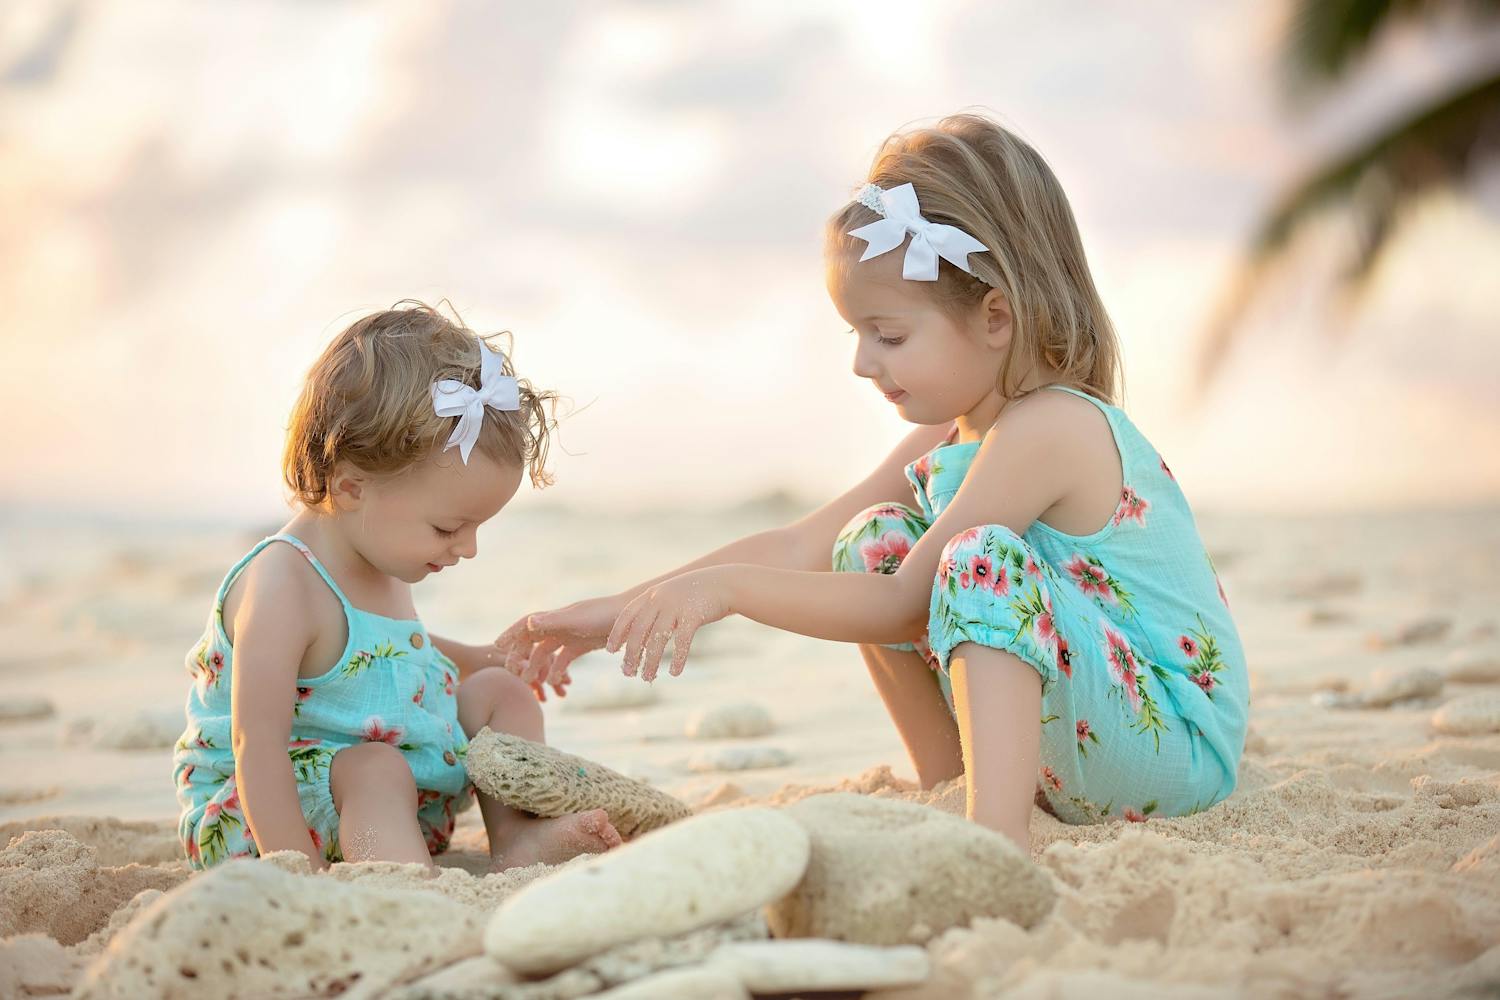 Baby and her young sister playing in the sand on the beach